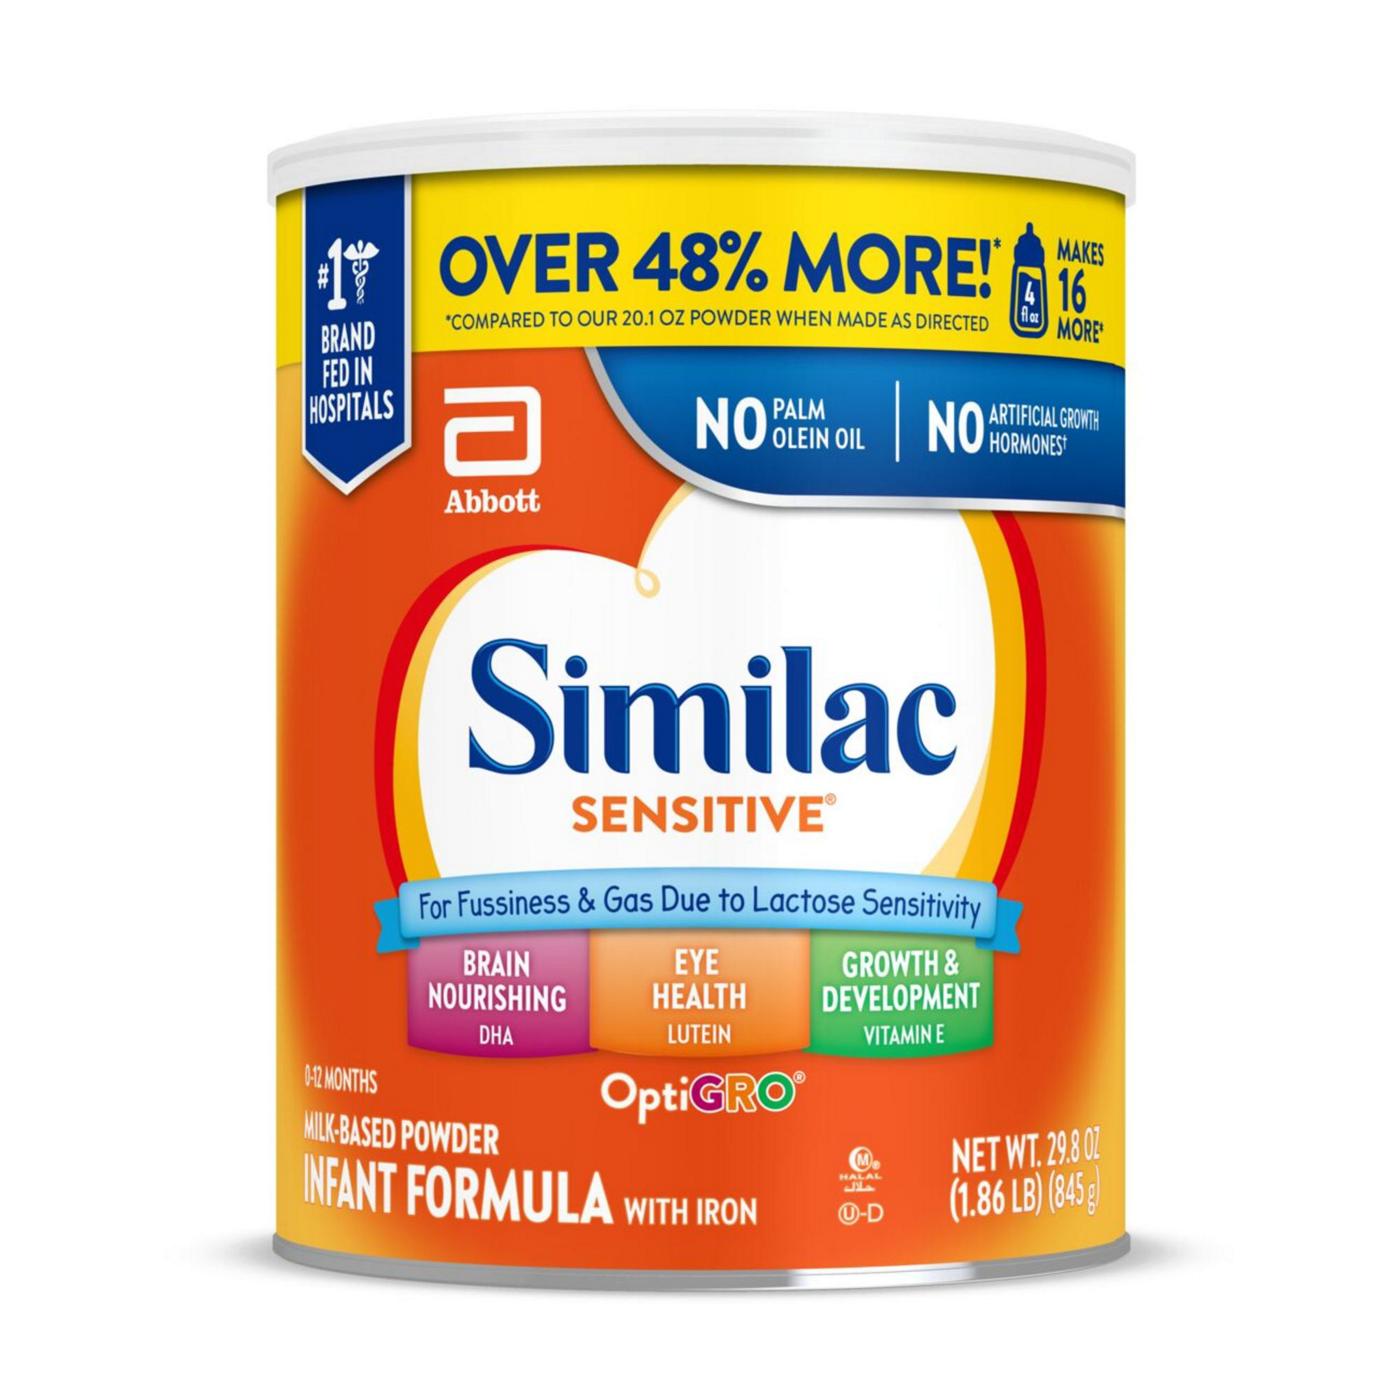 Similac Sensitive For Fussiness and Gas Infant Formula with Iron Powder; image 1 of 8